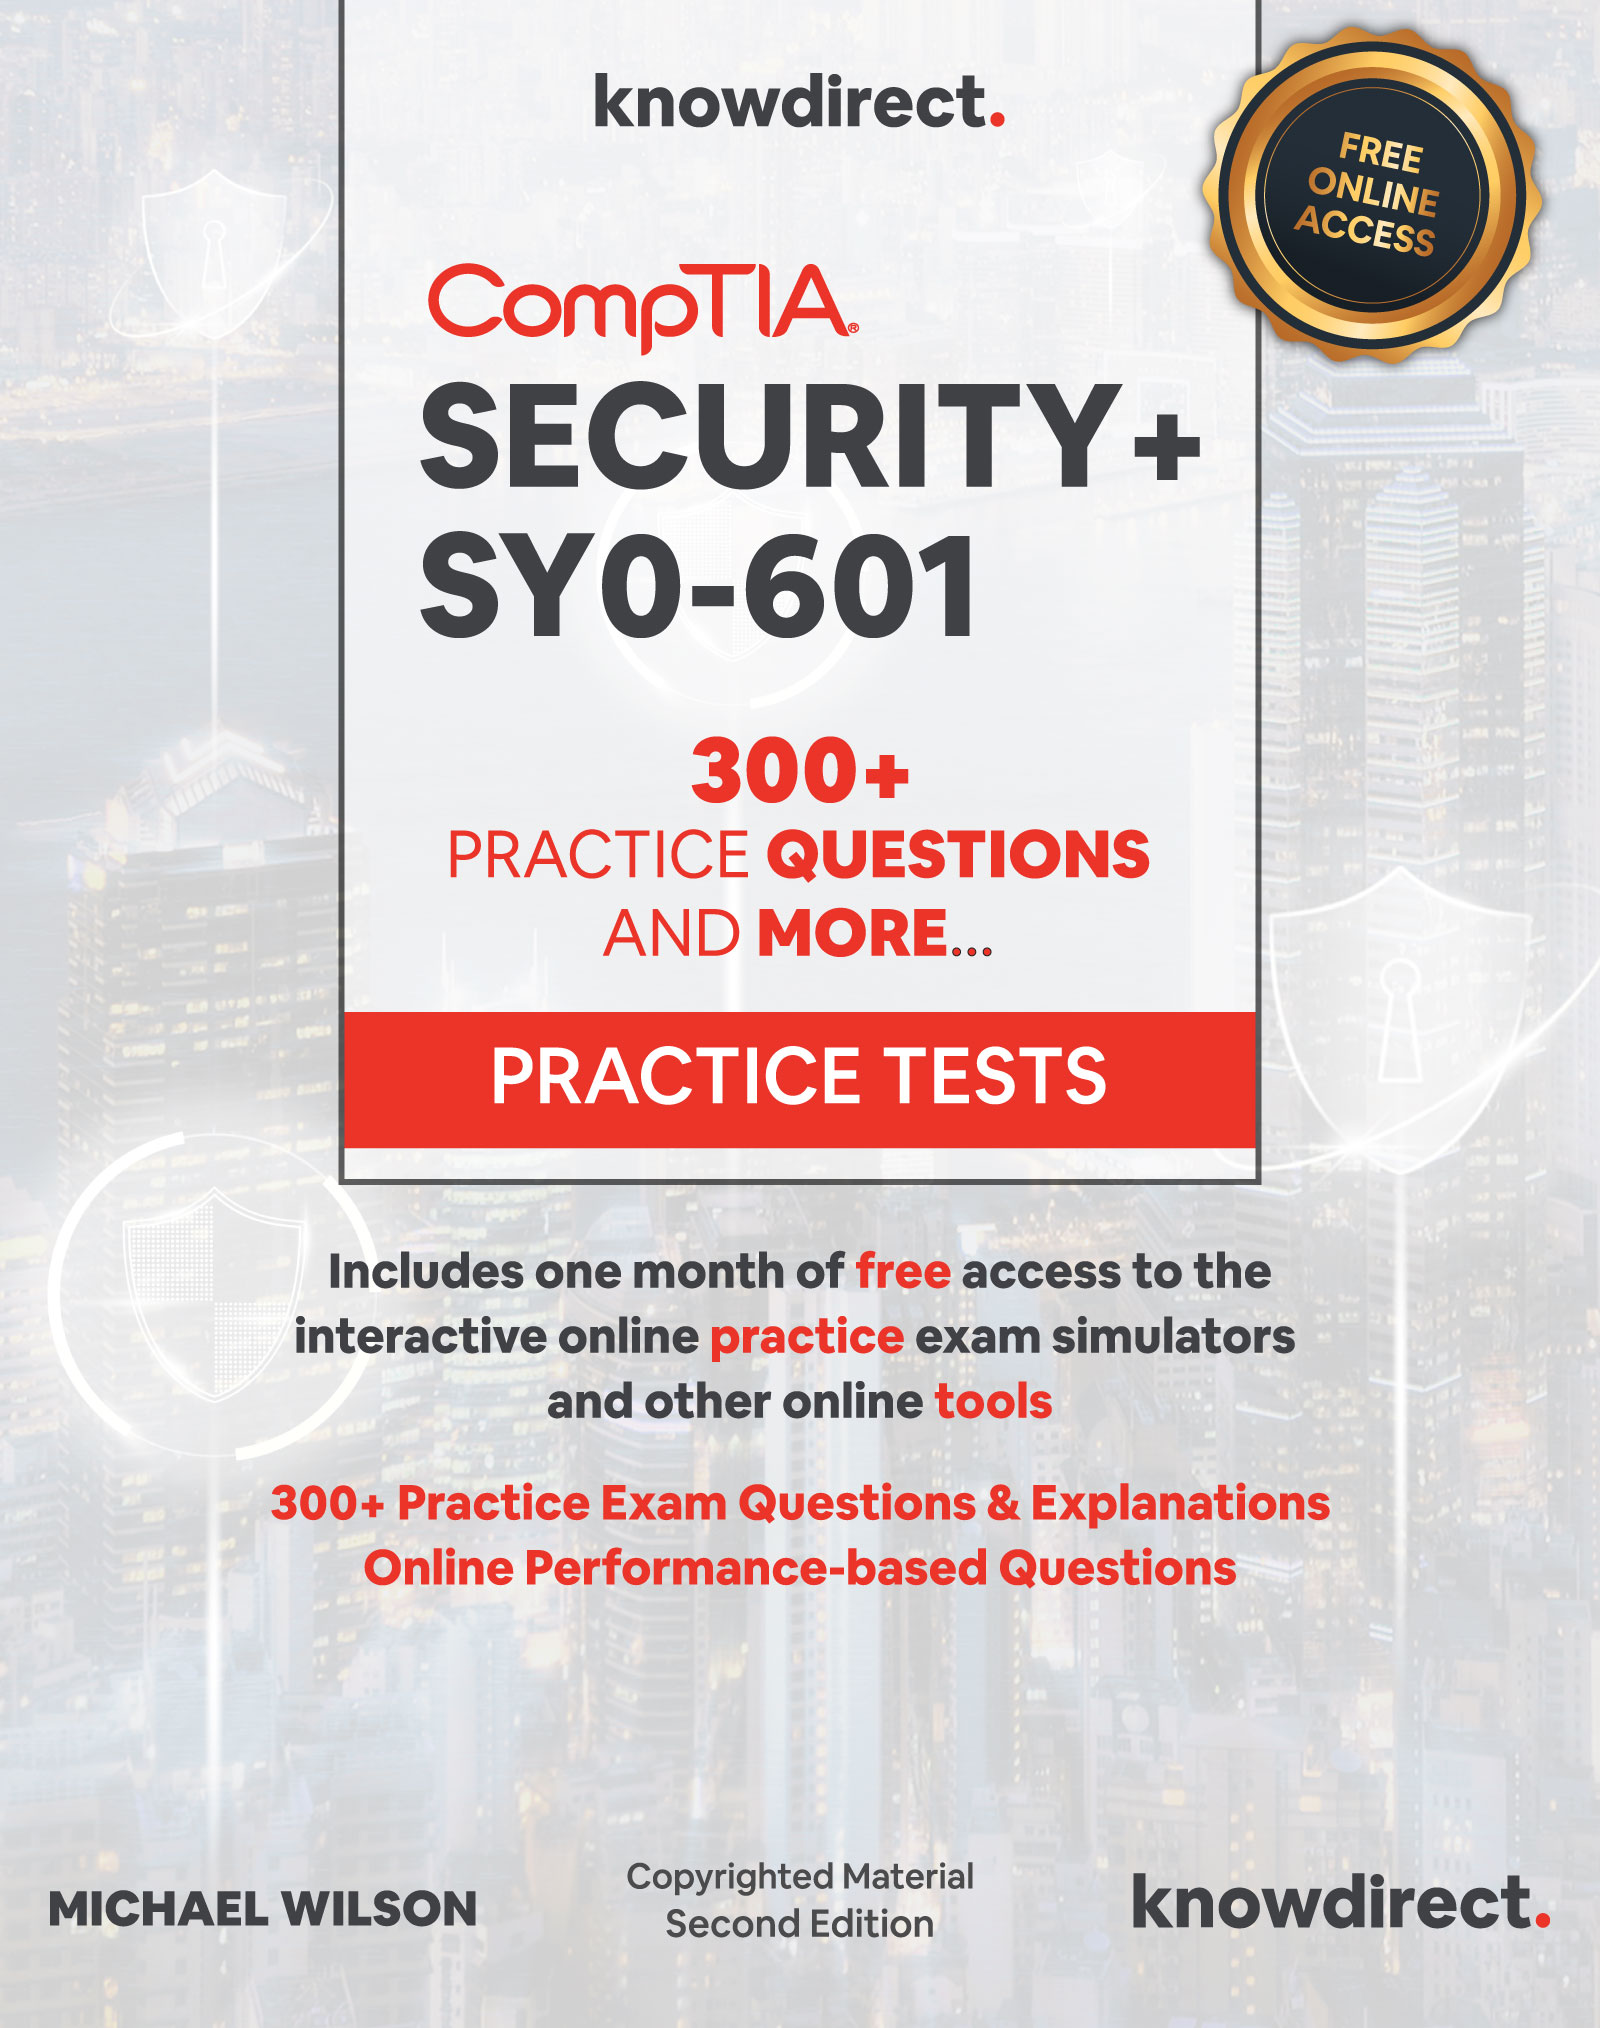 CompTIA Security+ SY0-601 Study Guide Practice Exam Questions